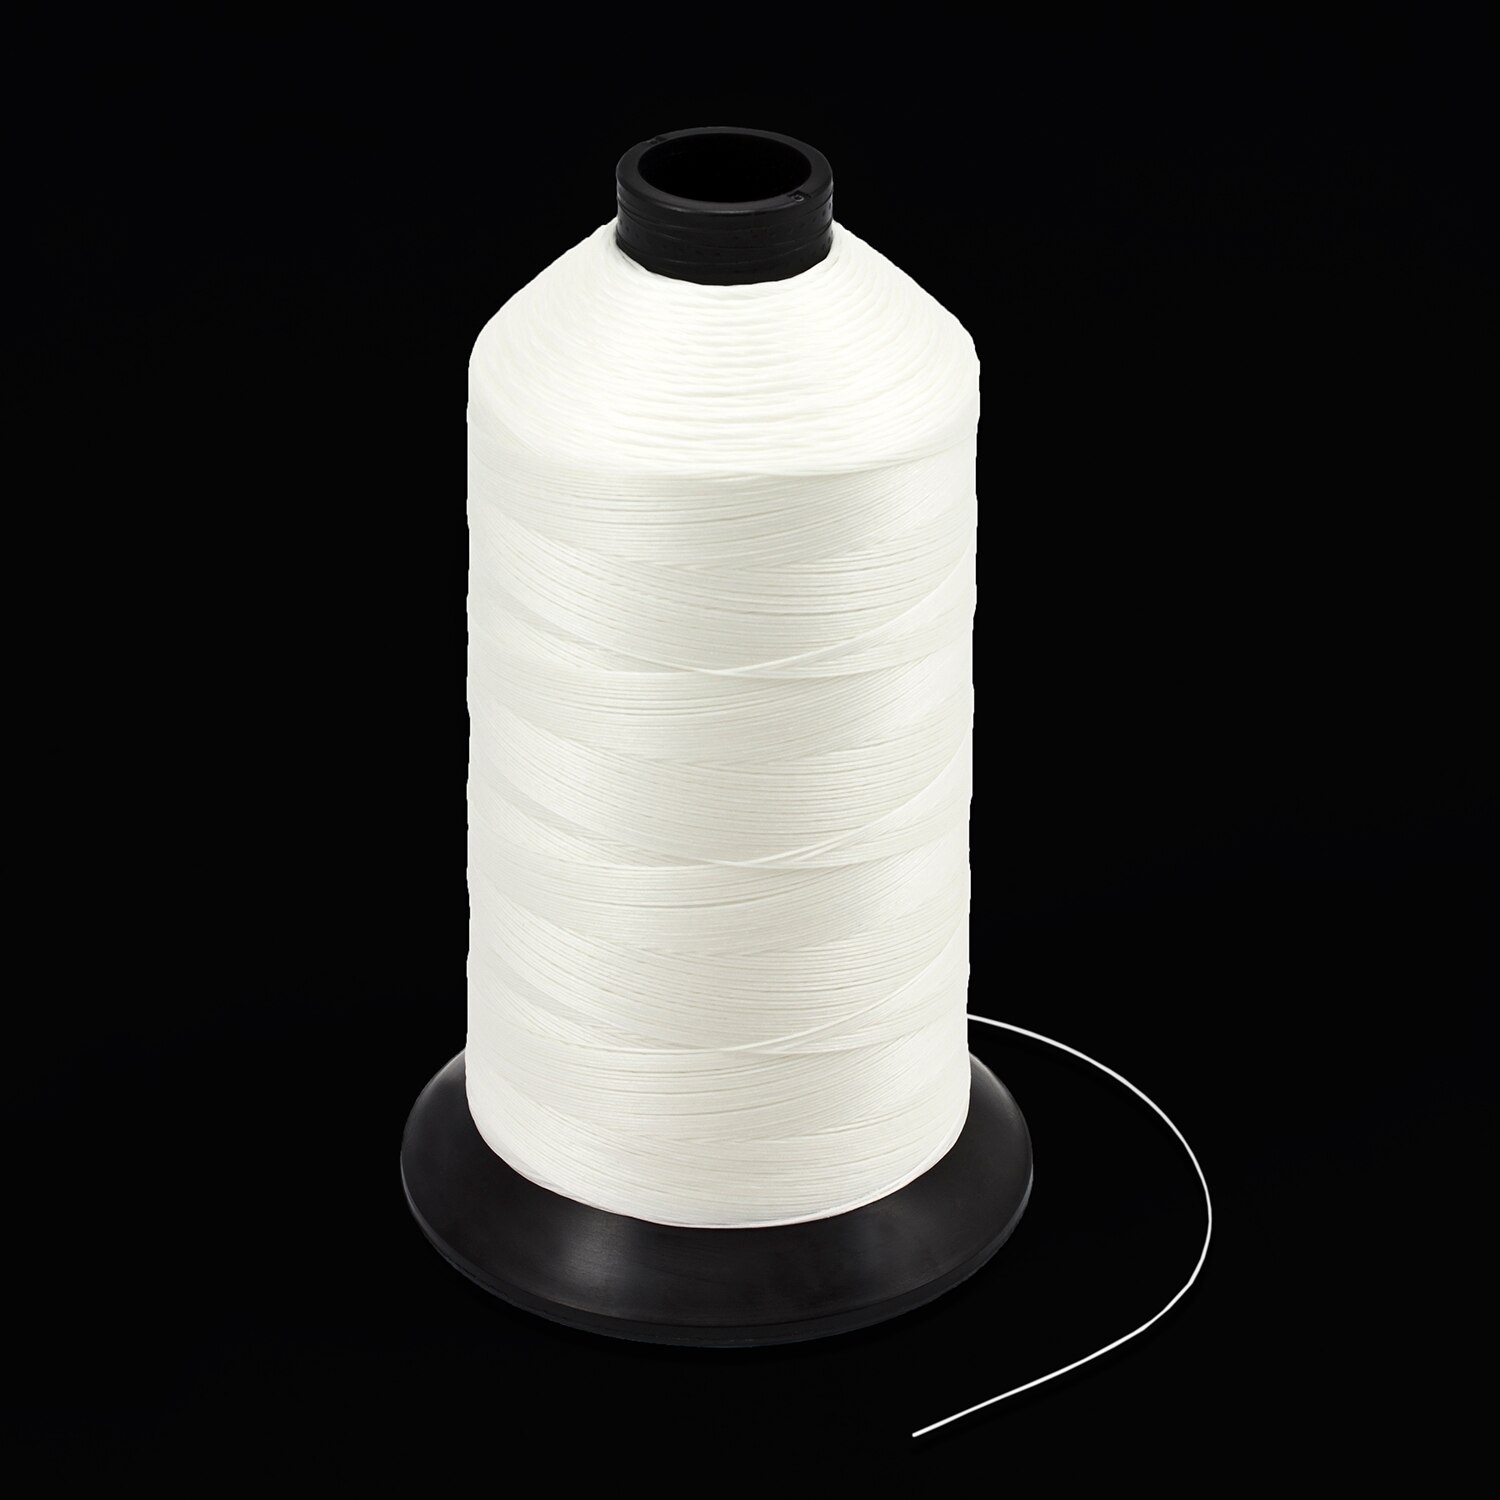 Item4ever White 100g UV Resistant High Tenacity Polyester Sewing Thread  Size Medium 210d/3 for Outdoor, Upholstered